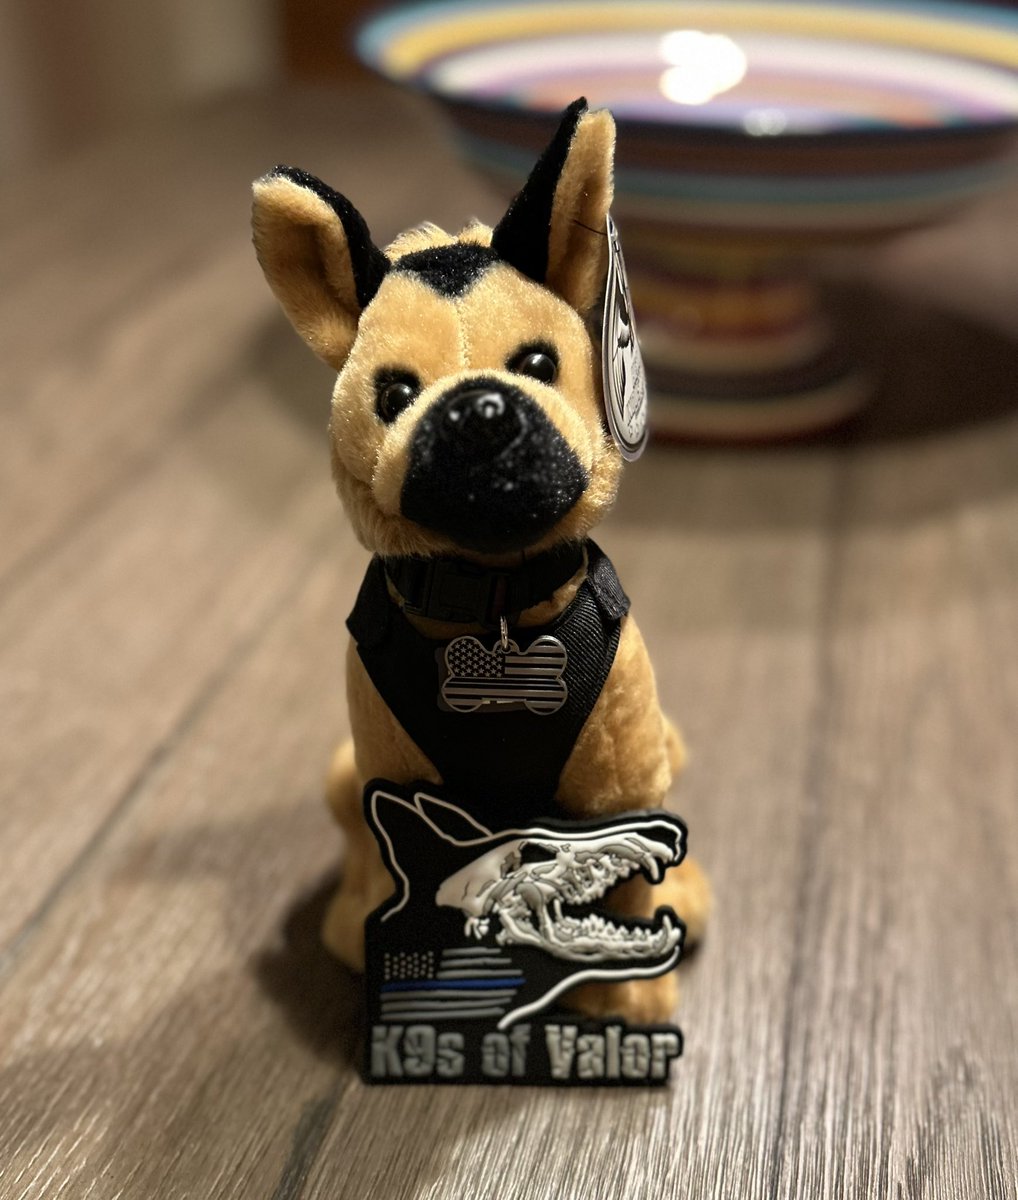 🐕 GIVEAWAY to help protect K9s 🐕 To enter: Like & Repost Everyone has a chance to win but as always, donors get 10 extra entries! ➡️ k9sofvalor.org (DM receipt 2me 2qualify) Ends 4/12 #OPLive Sharing is just as important as donations, so TY! #MyHeroesWearCollars